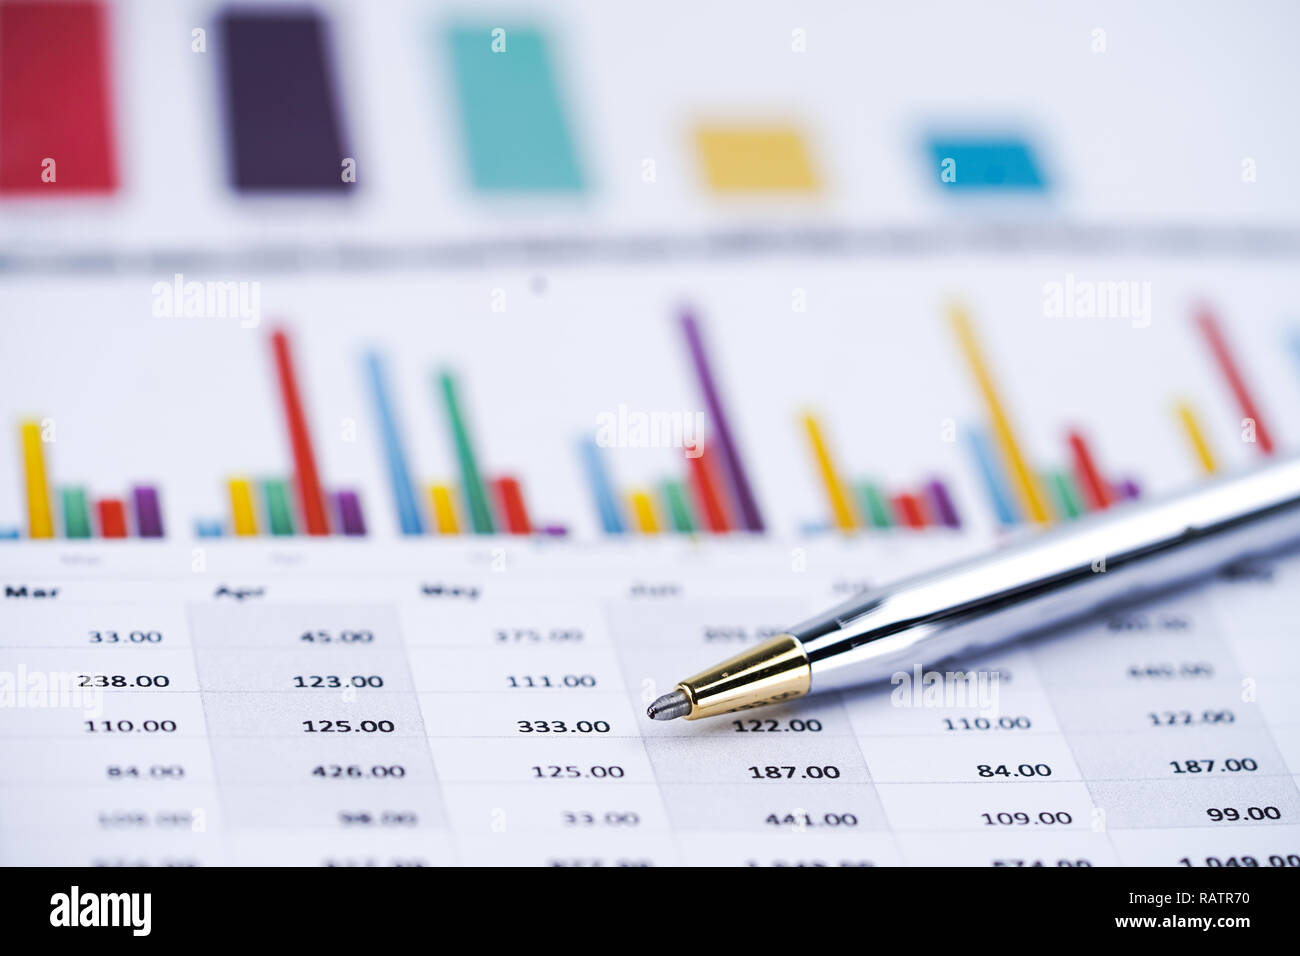 Charts Graphs spreadsheet paper. Financial development, Banking Account, Statistics, Investment Analytic research data economy, Stock exchange trading Stock Photo